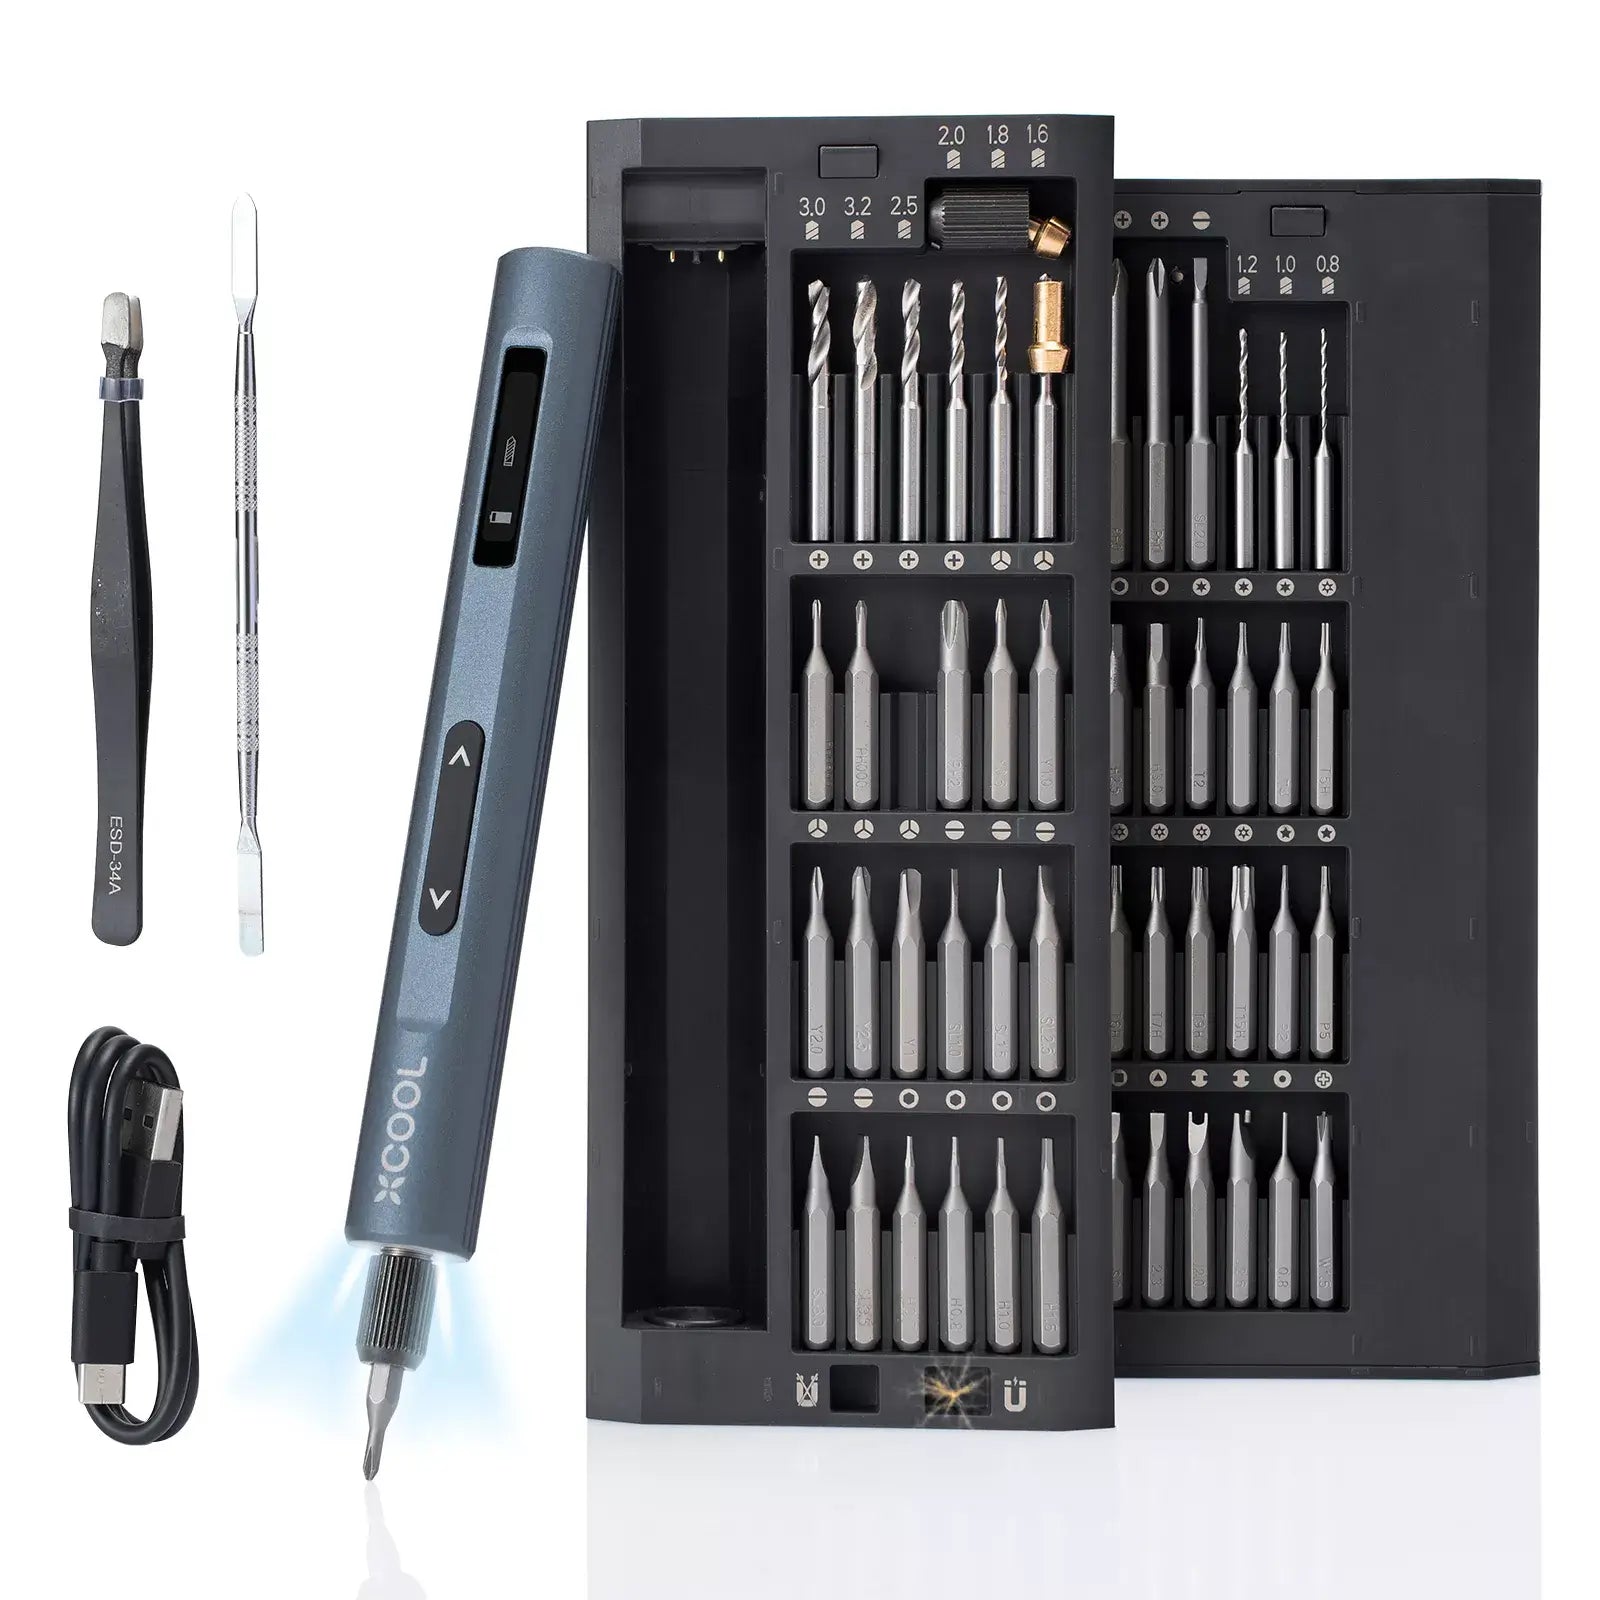 xCool Mini Electric Precision Screwdriver Set for Computer and Watch Repair